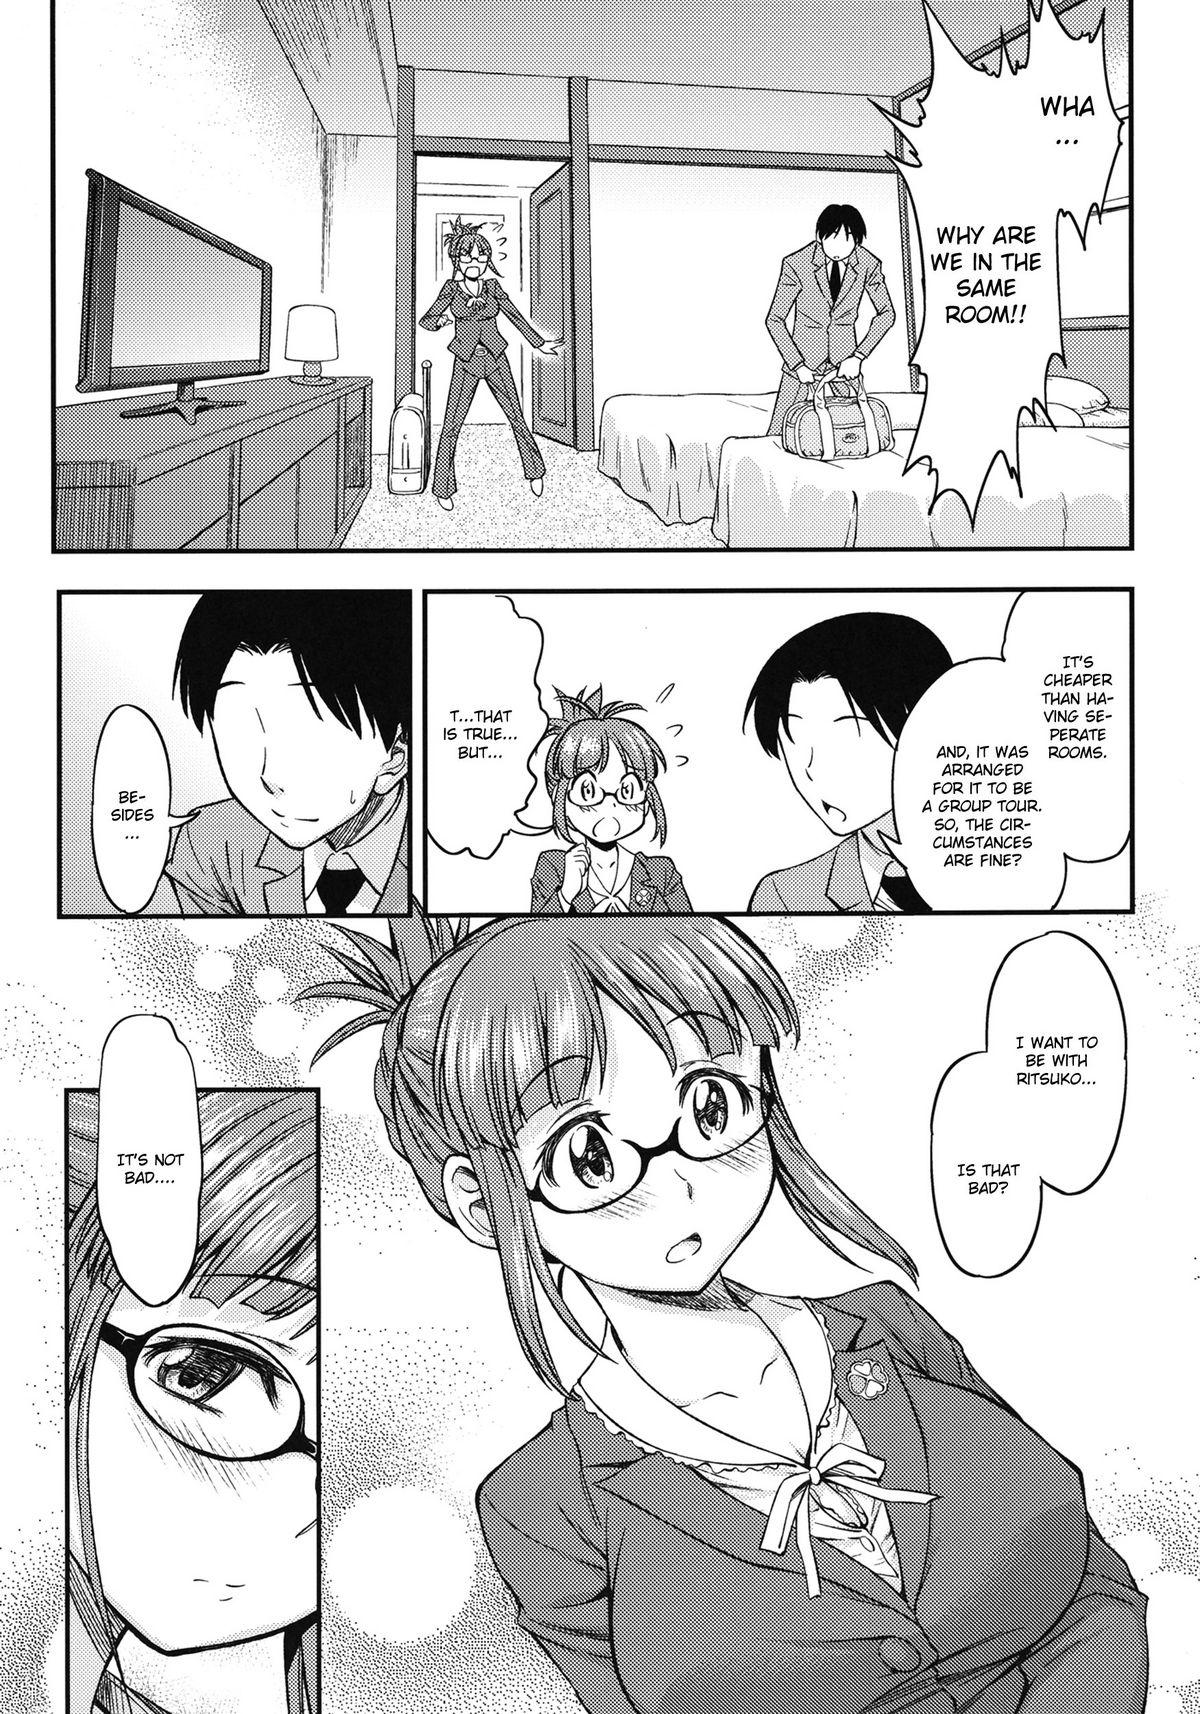 Pissing MAGIC OF LOVE - The idolmaster Escort - Page 2